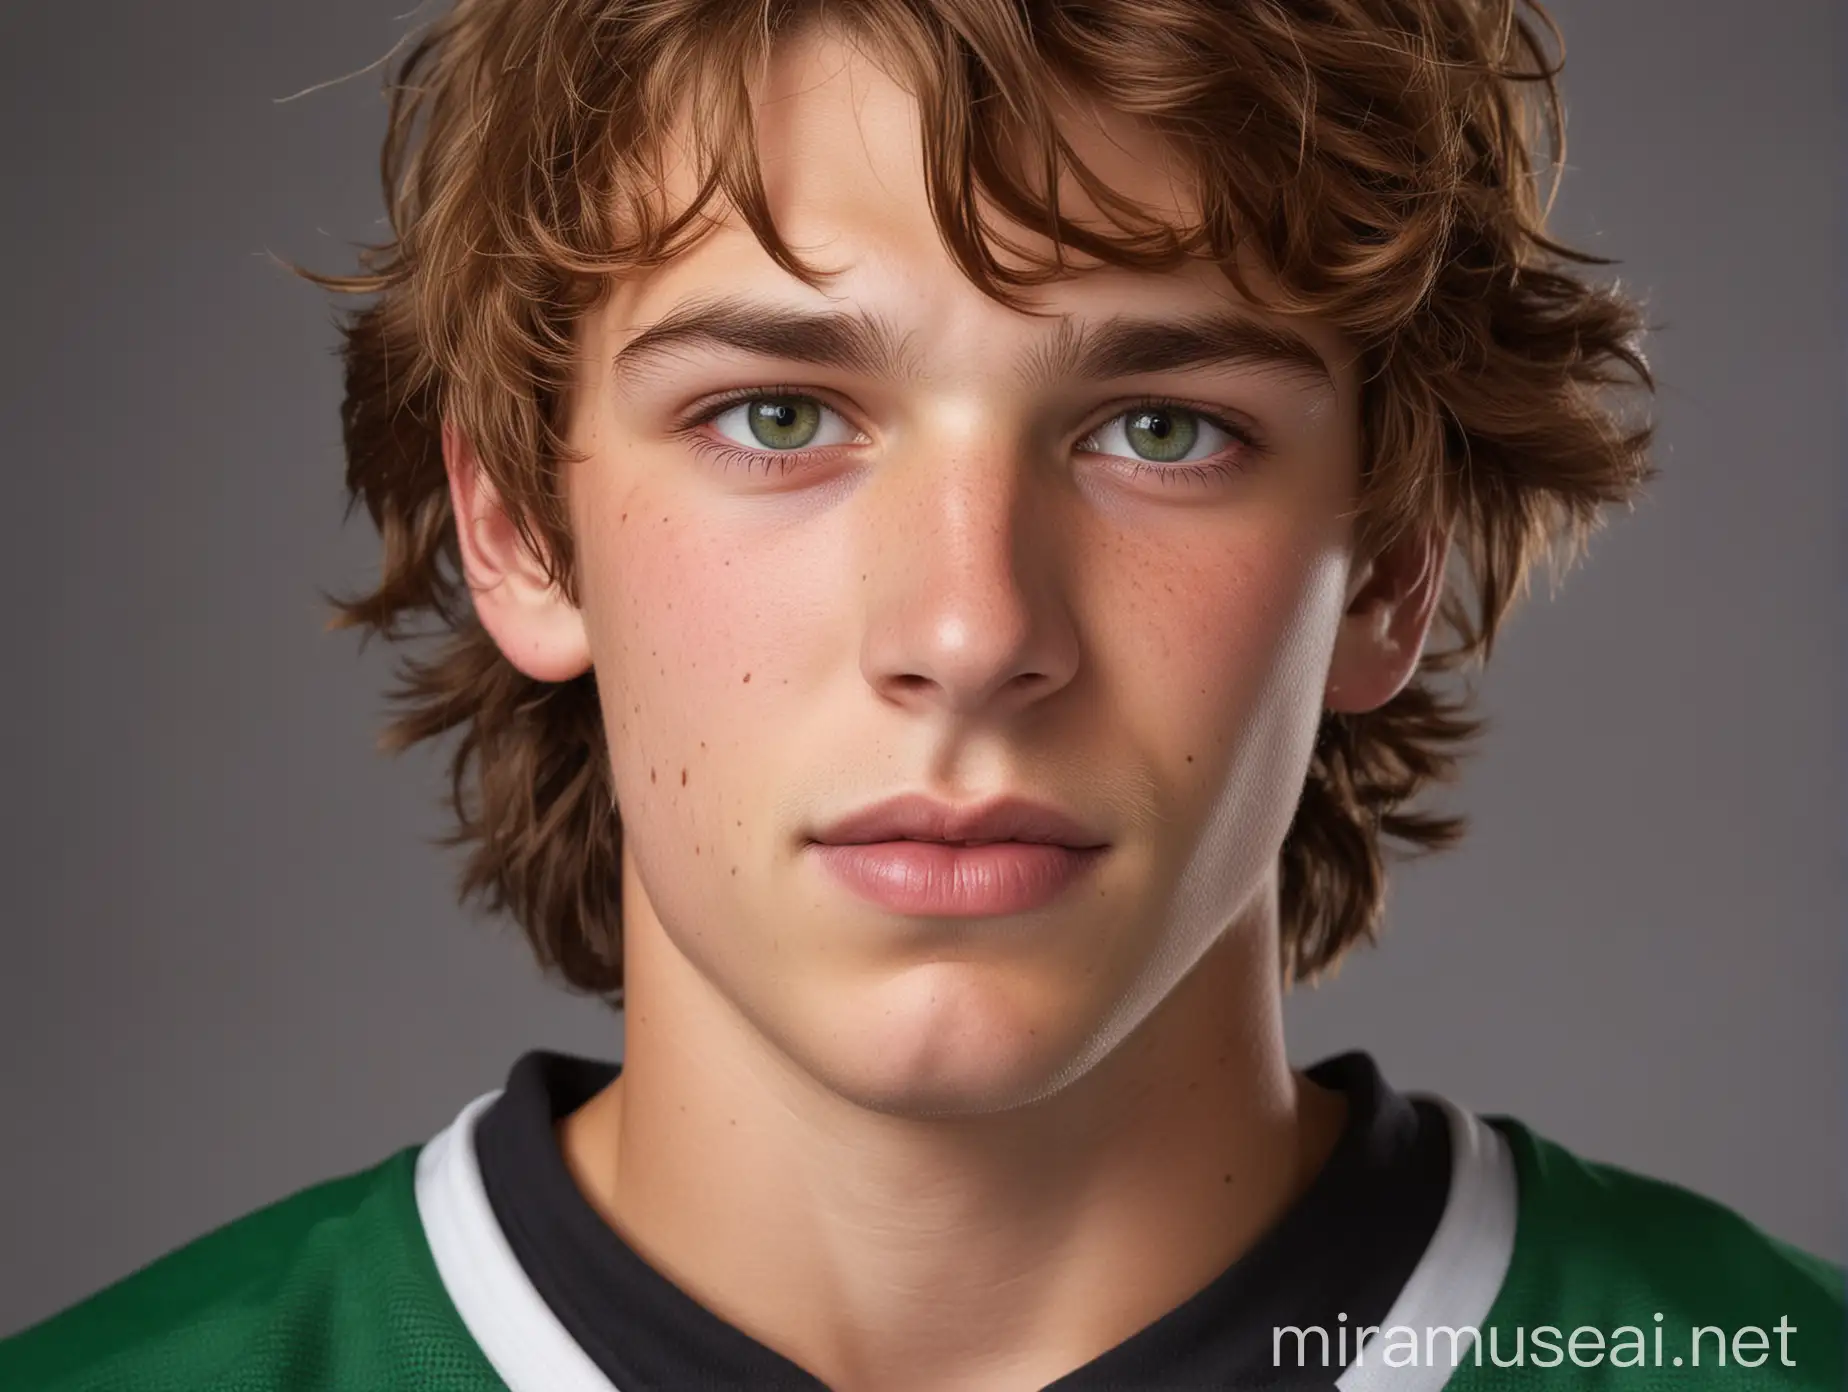 Handsome Teen Hockey Player with Light Green Eyes and Wavy Chestnut Hair